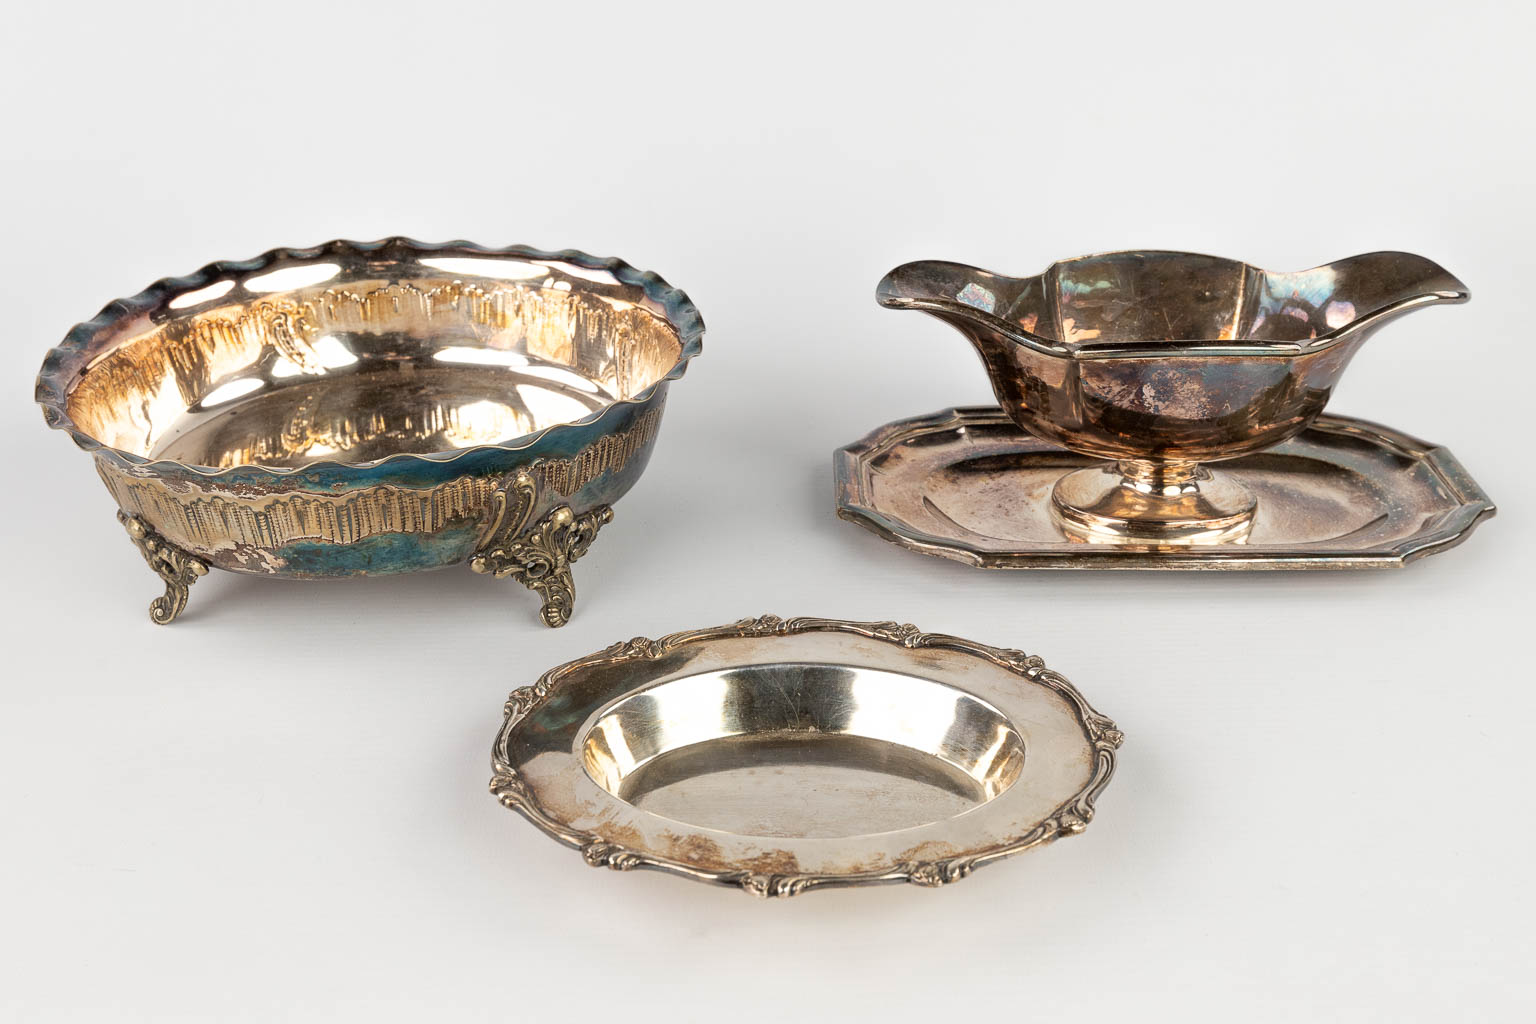 A set of table accessories and utensils, silver-plated metal. (H:8 x D:22 cm) - Image 18 of 23